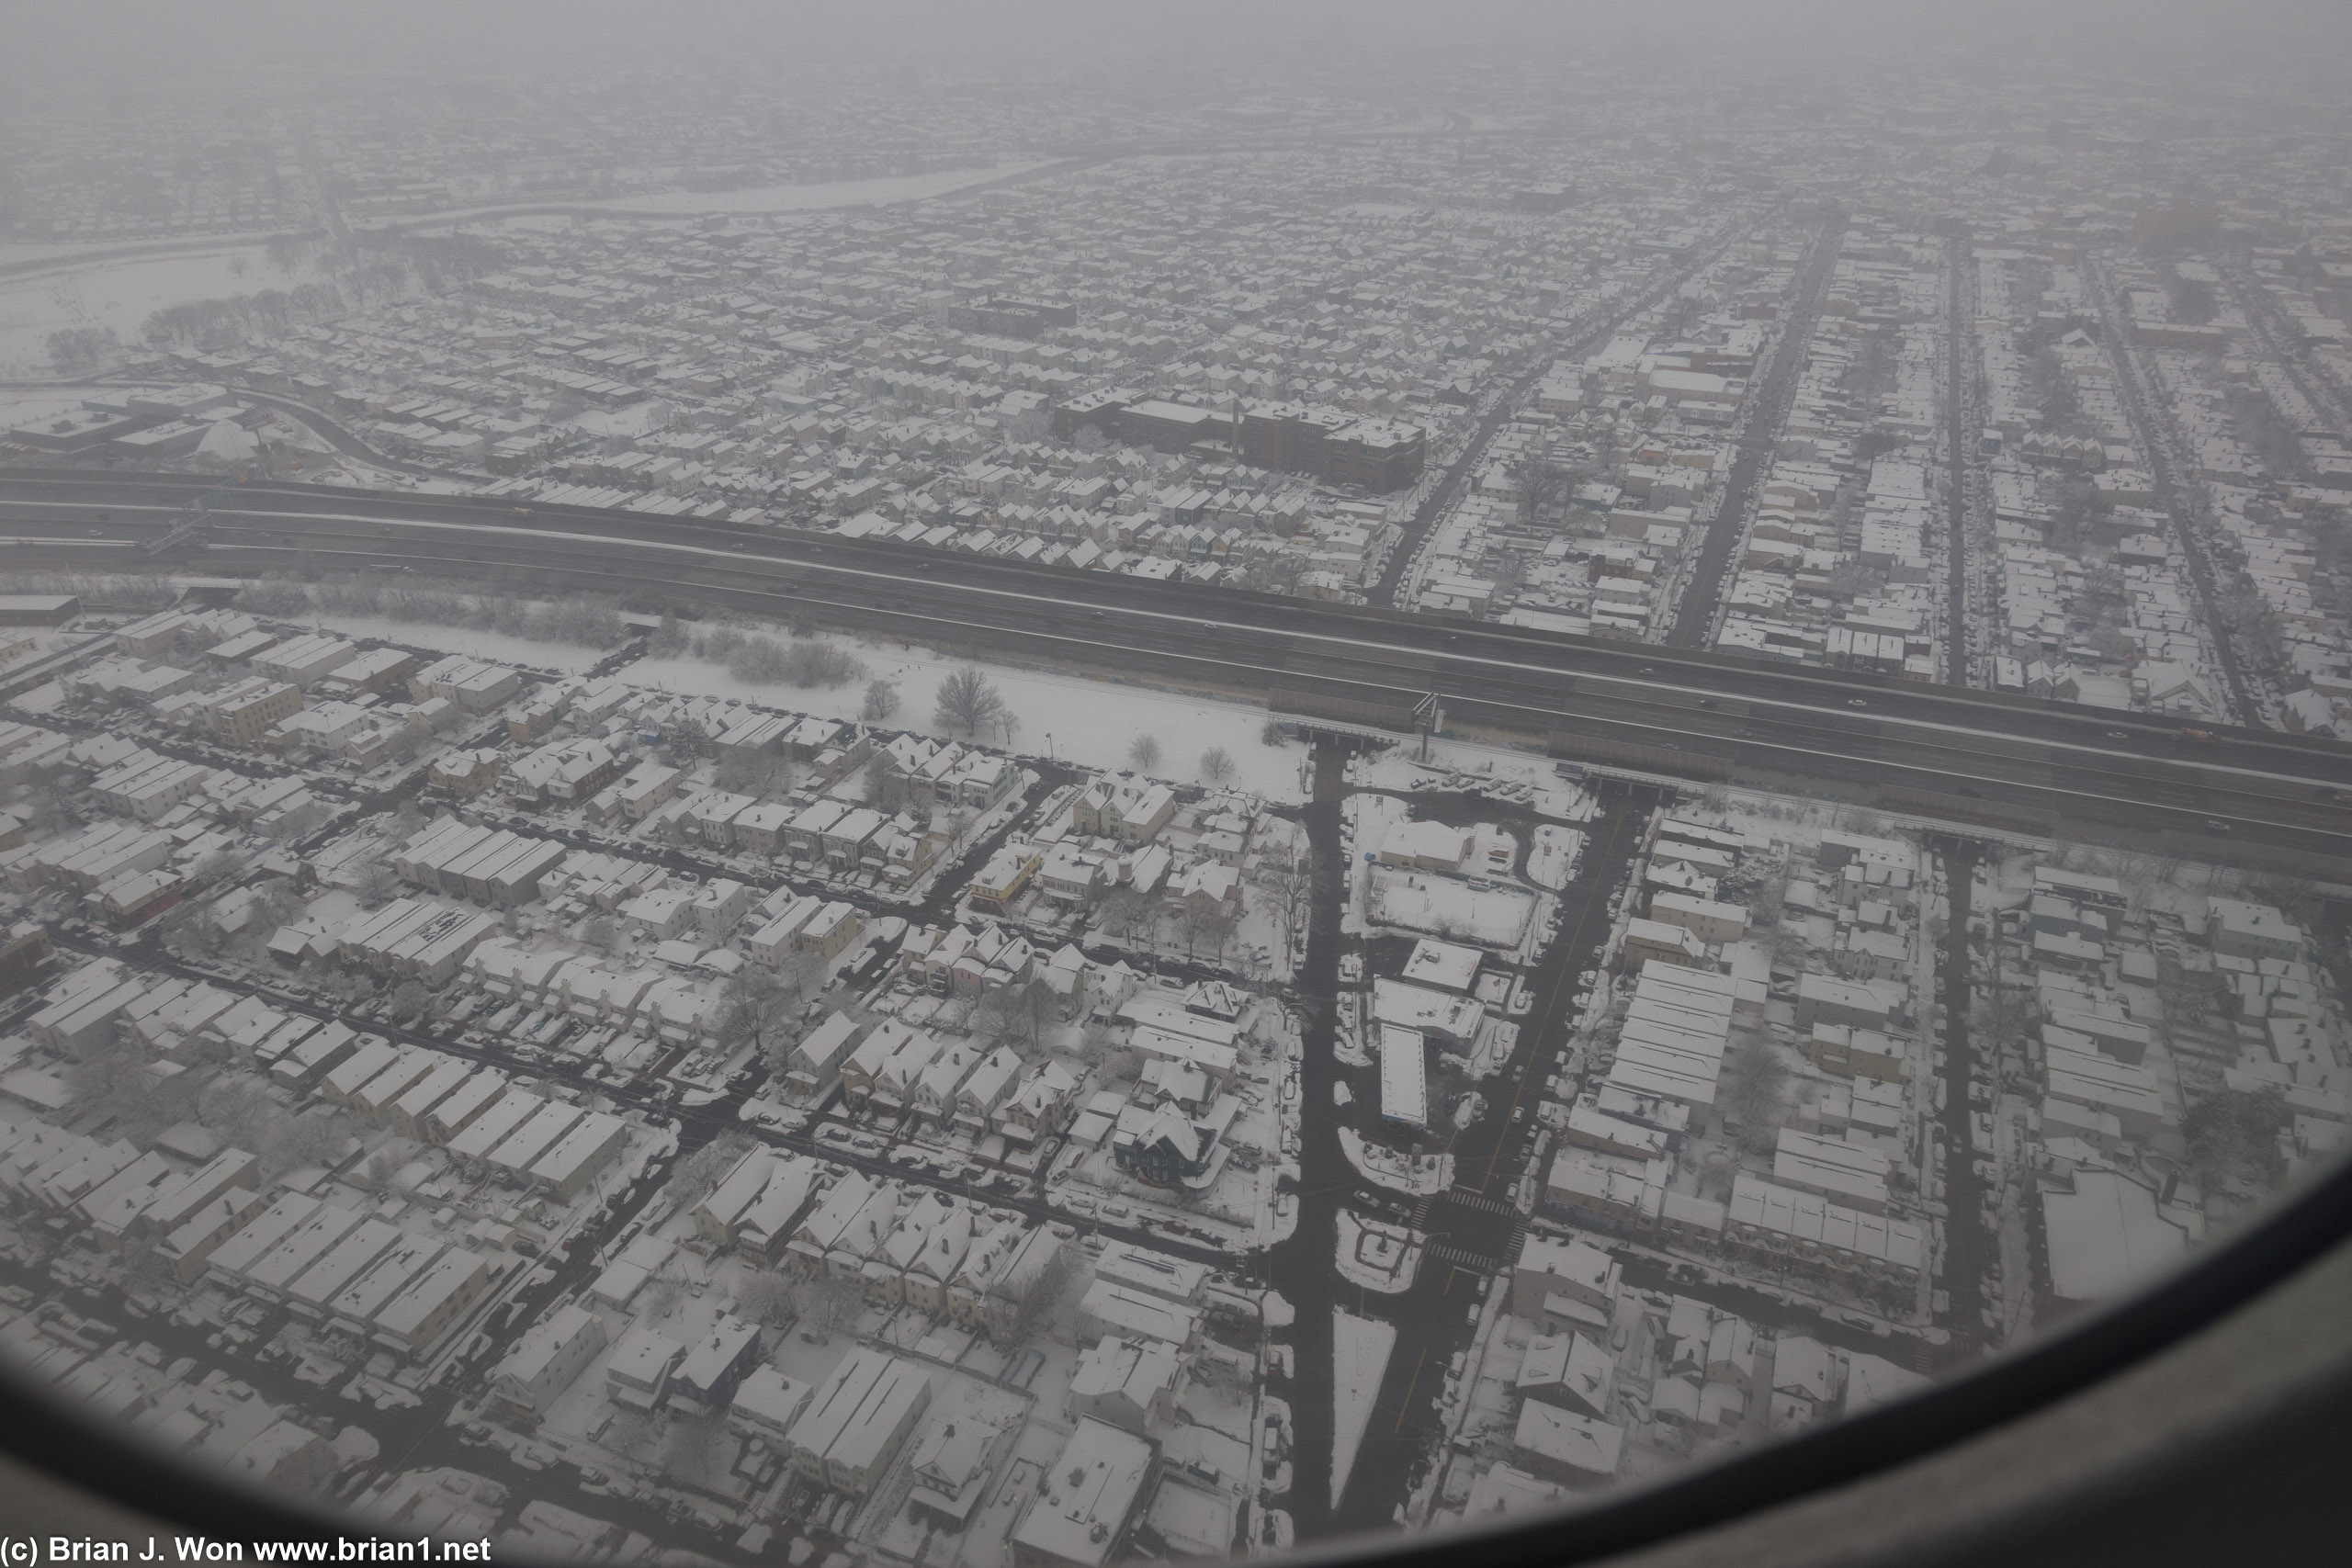 Snow-lined streets underneath final approach to Newark International Airport.